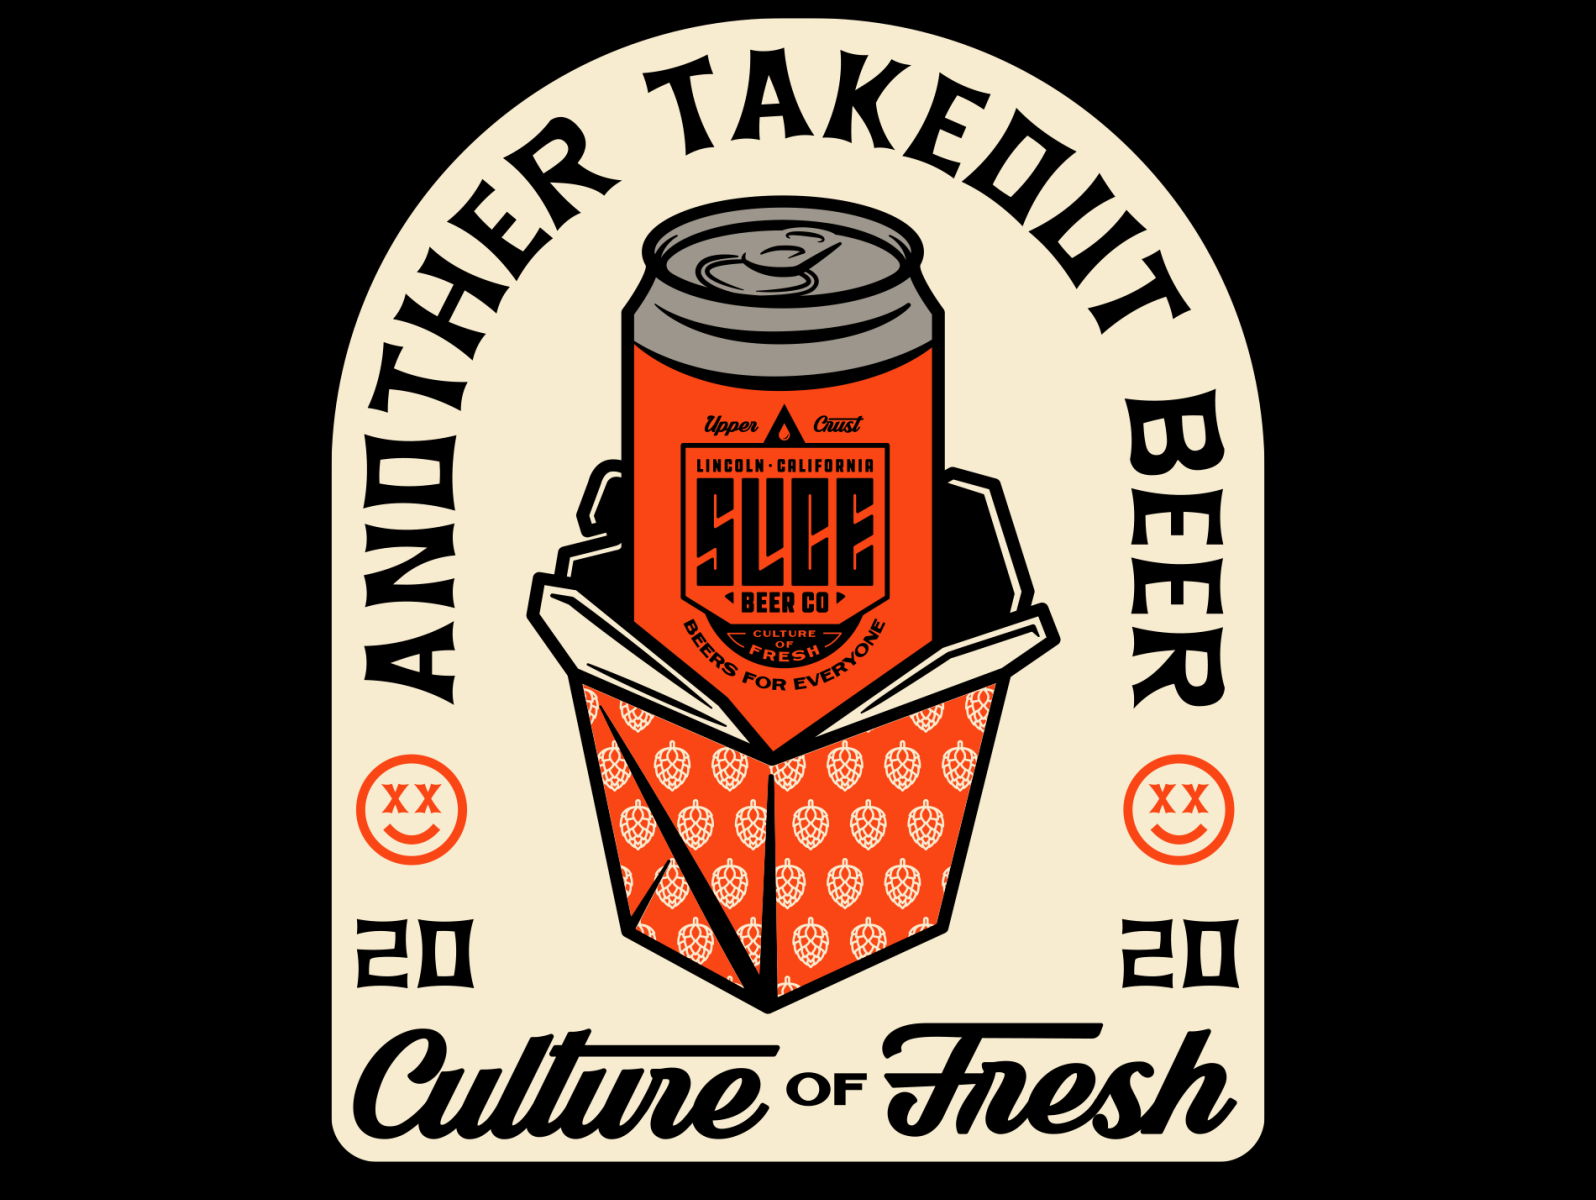 Another takeout beer 2020 by Brethren Design Co on Dribbble